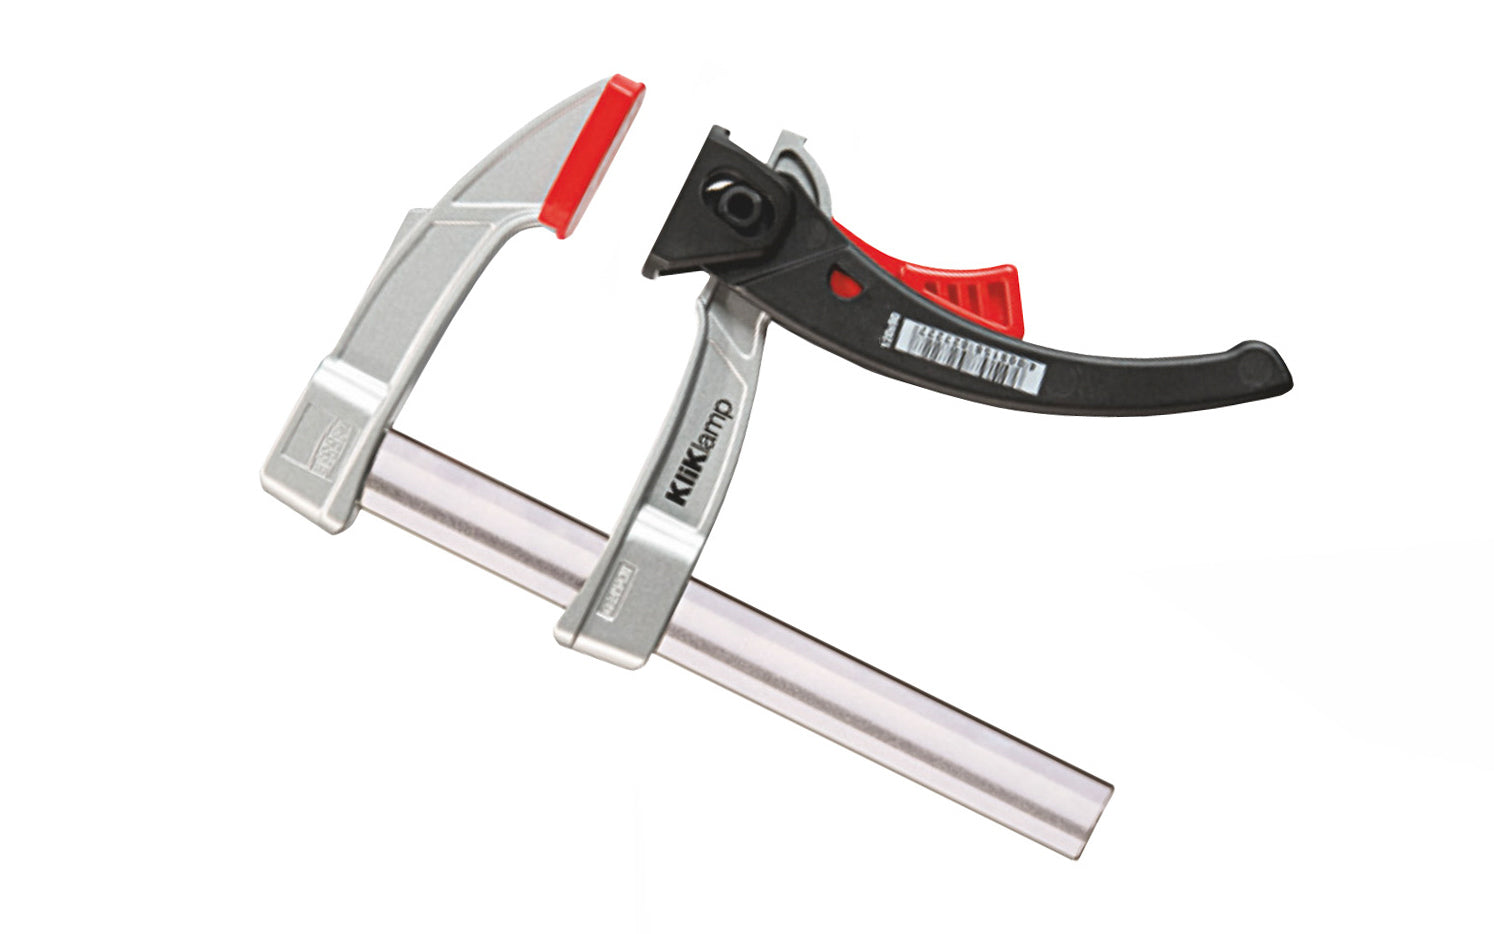 Bessey 4" "KliKlamp" Light Duty Lever Clamp KLI3.004 creates up to 260 lbs. of clamping force. Positive locking ratchet action. Made of sturdy magnesium which makes it lightweight & strong. Fixed arm with v-grooves holds round & angular components firmly in place. 4" clamping capacity - 3" throat depth. Made in Germany 091162009901